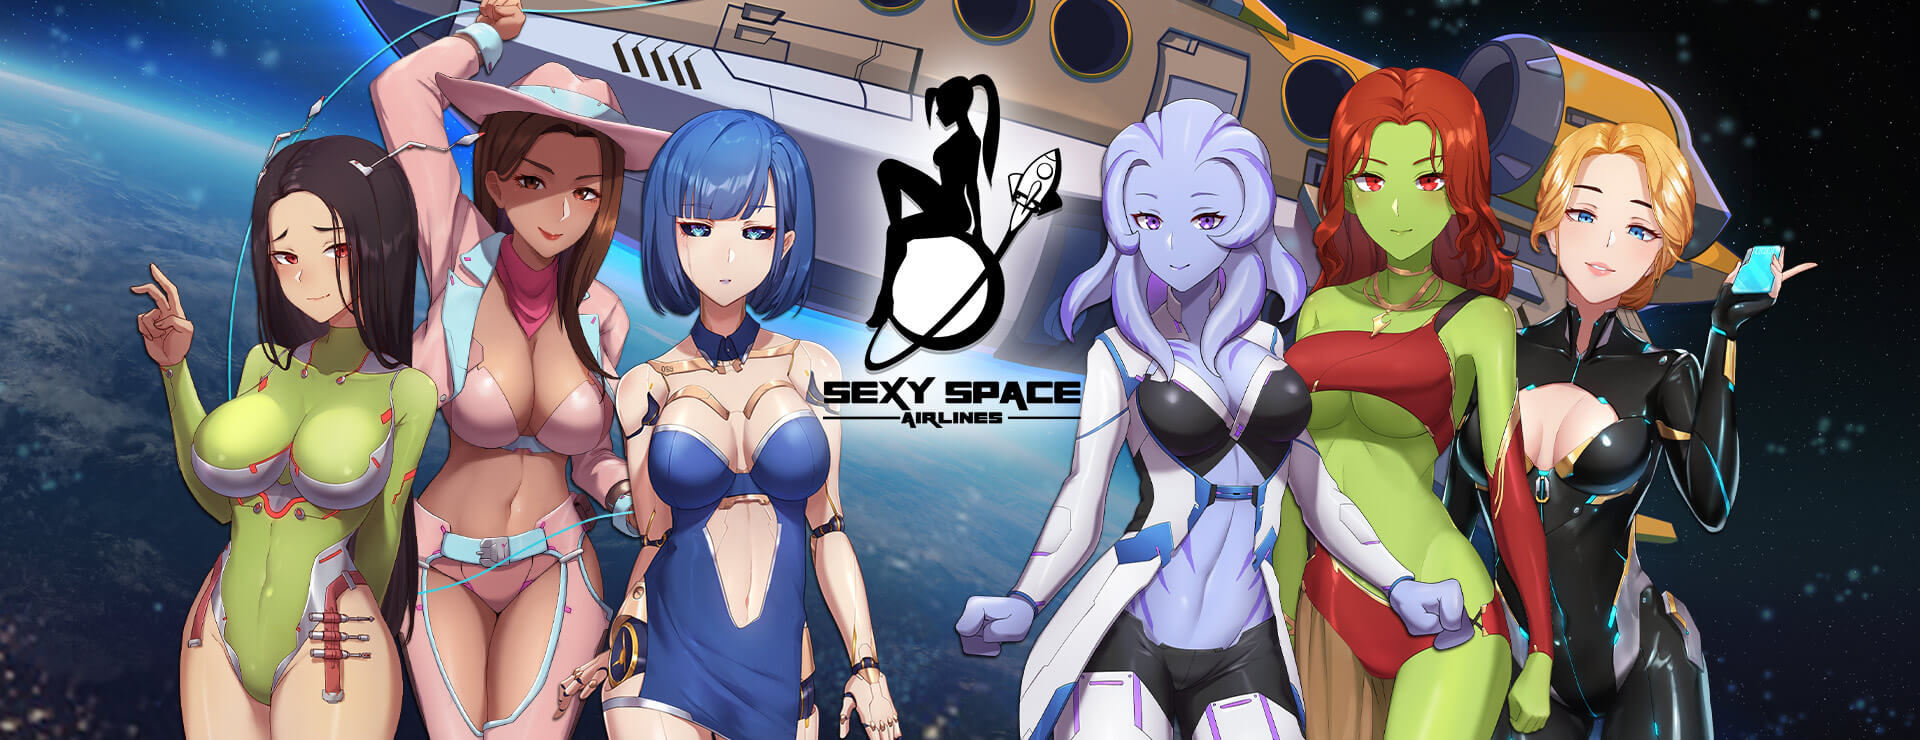 Sexy Space Airlines - Łatwe Gra